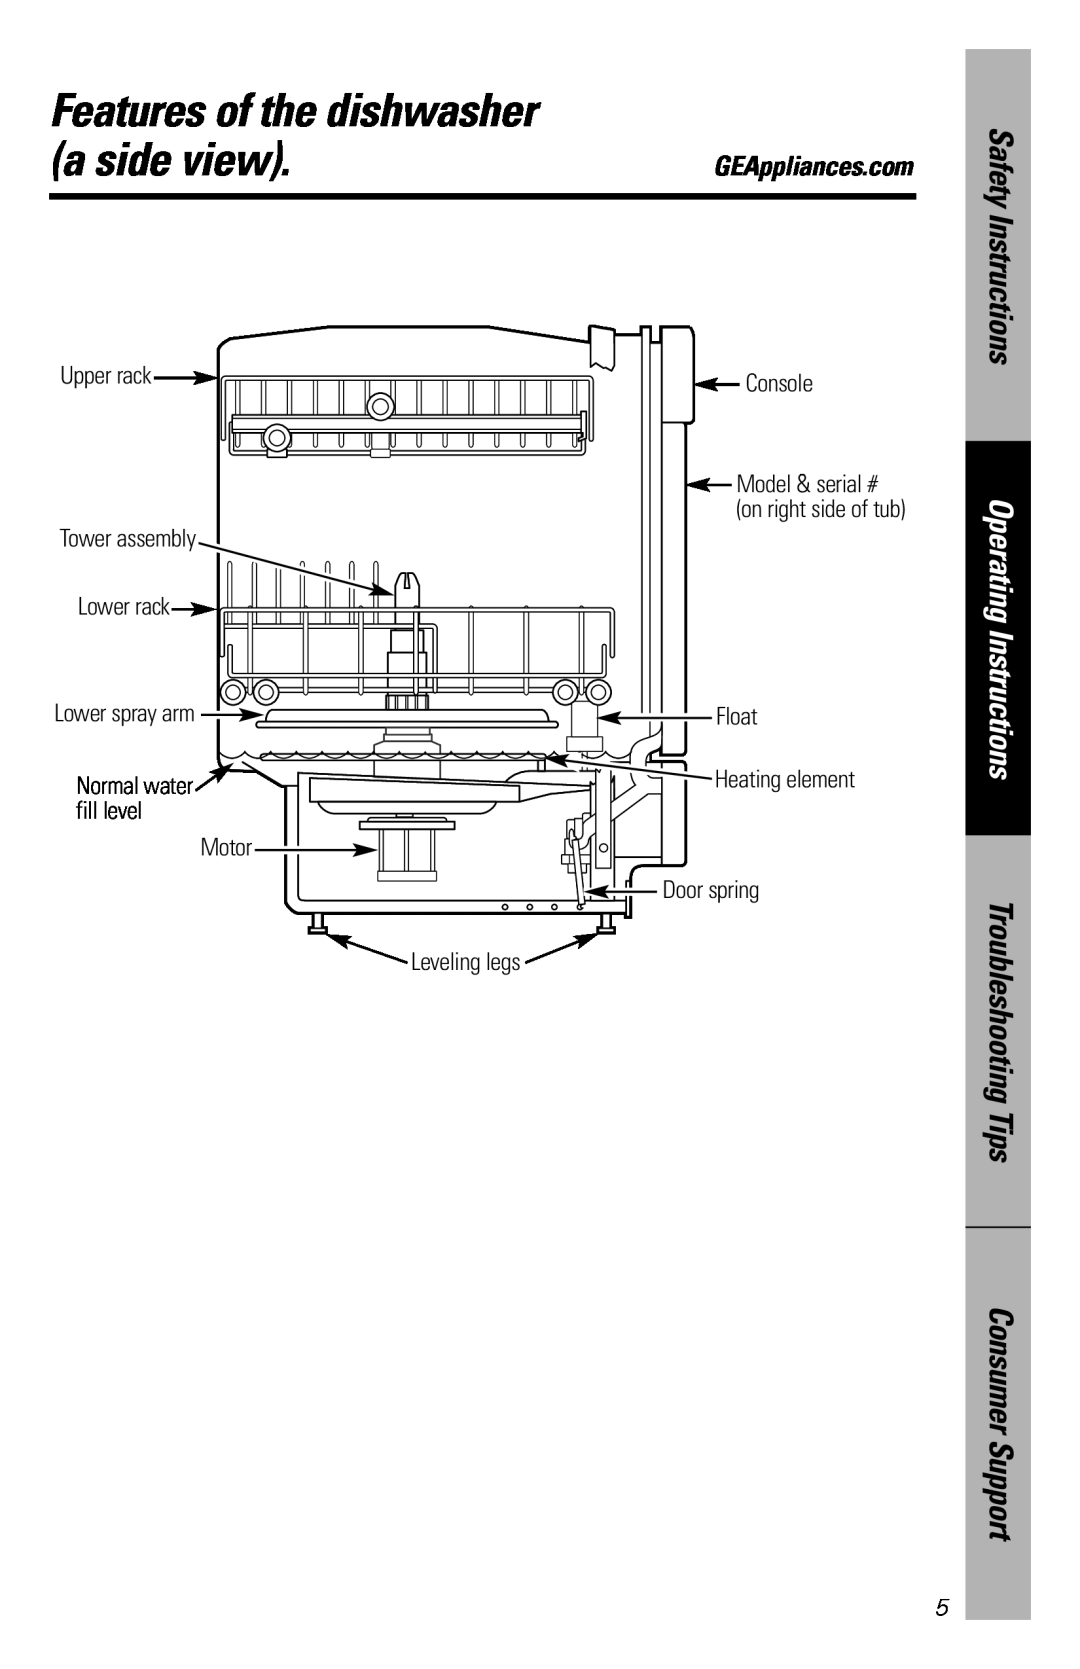 GE GSS1800 Features of the dishwasher, a side view, Troubleshooting Tips, Operating Instructions, Consumer Support, Float 